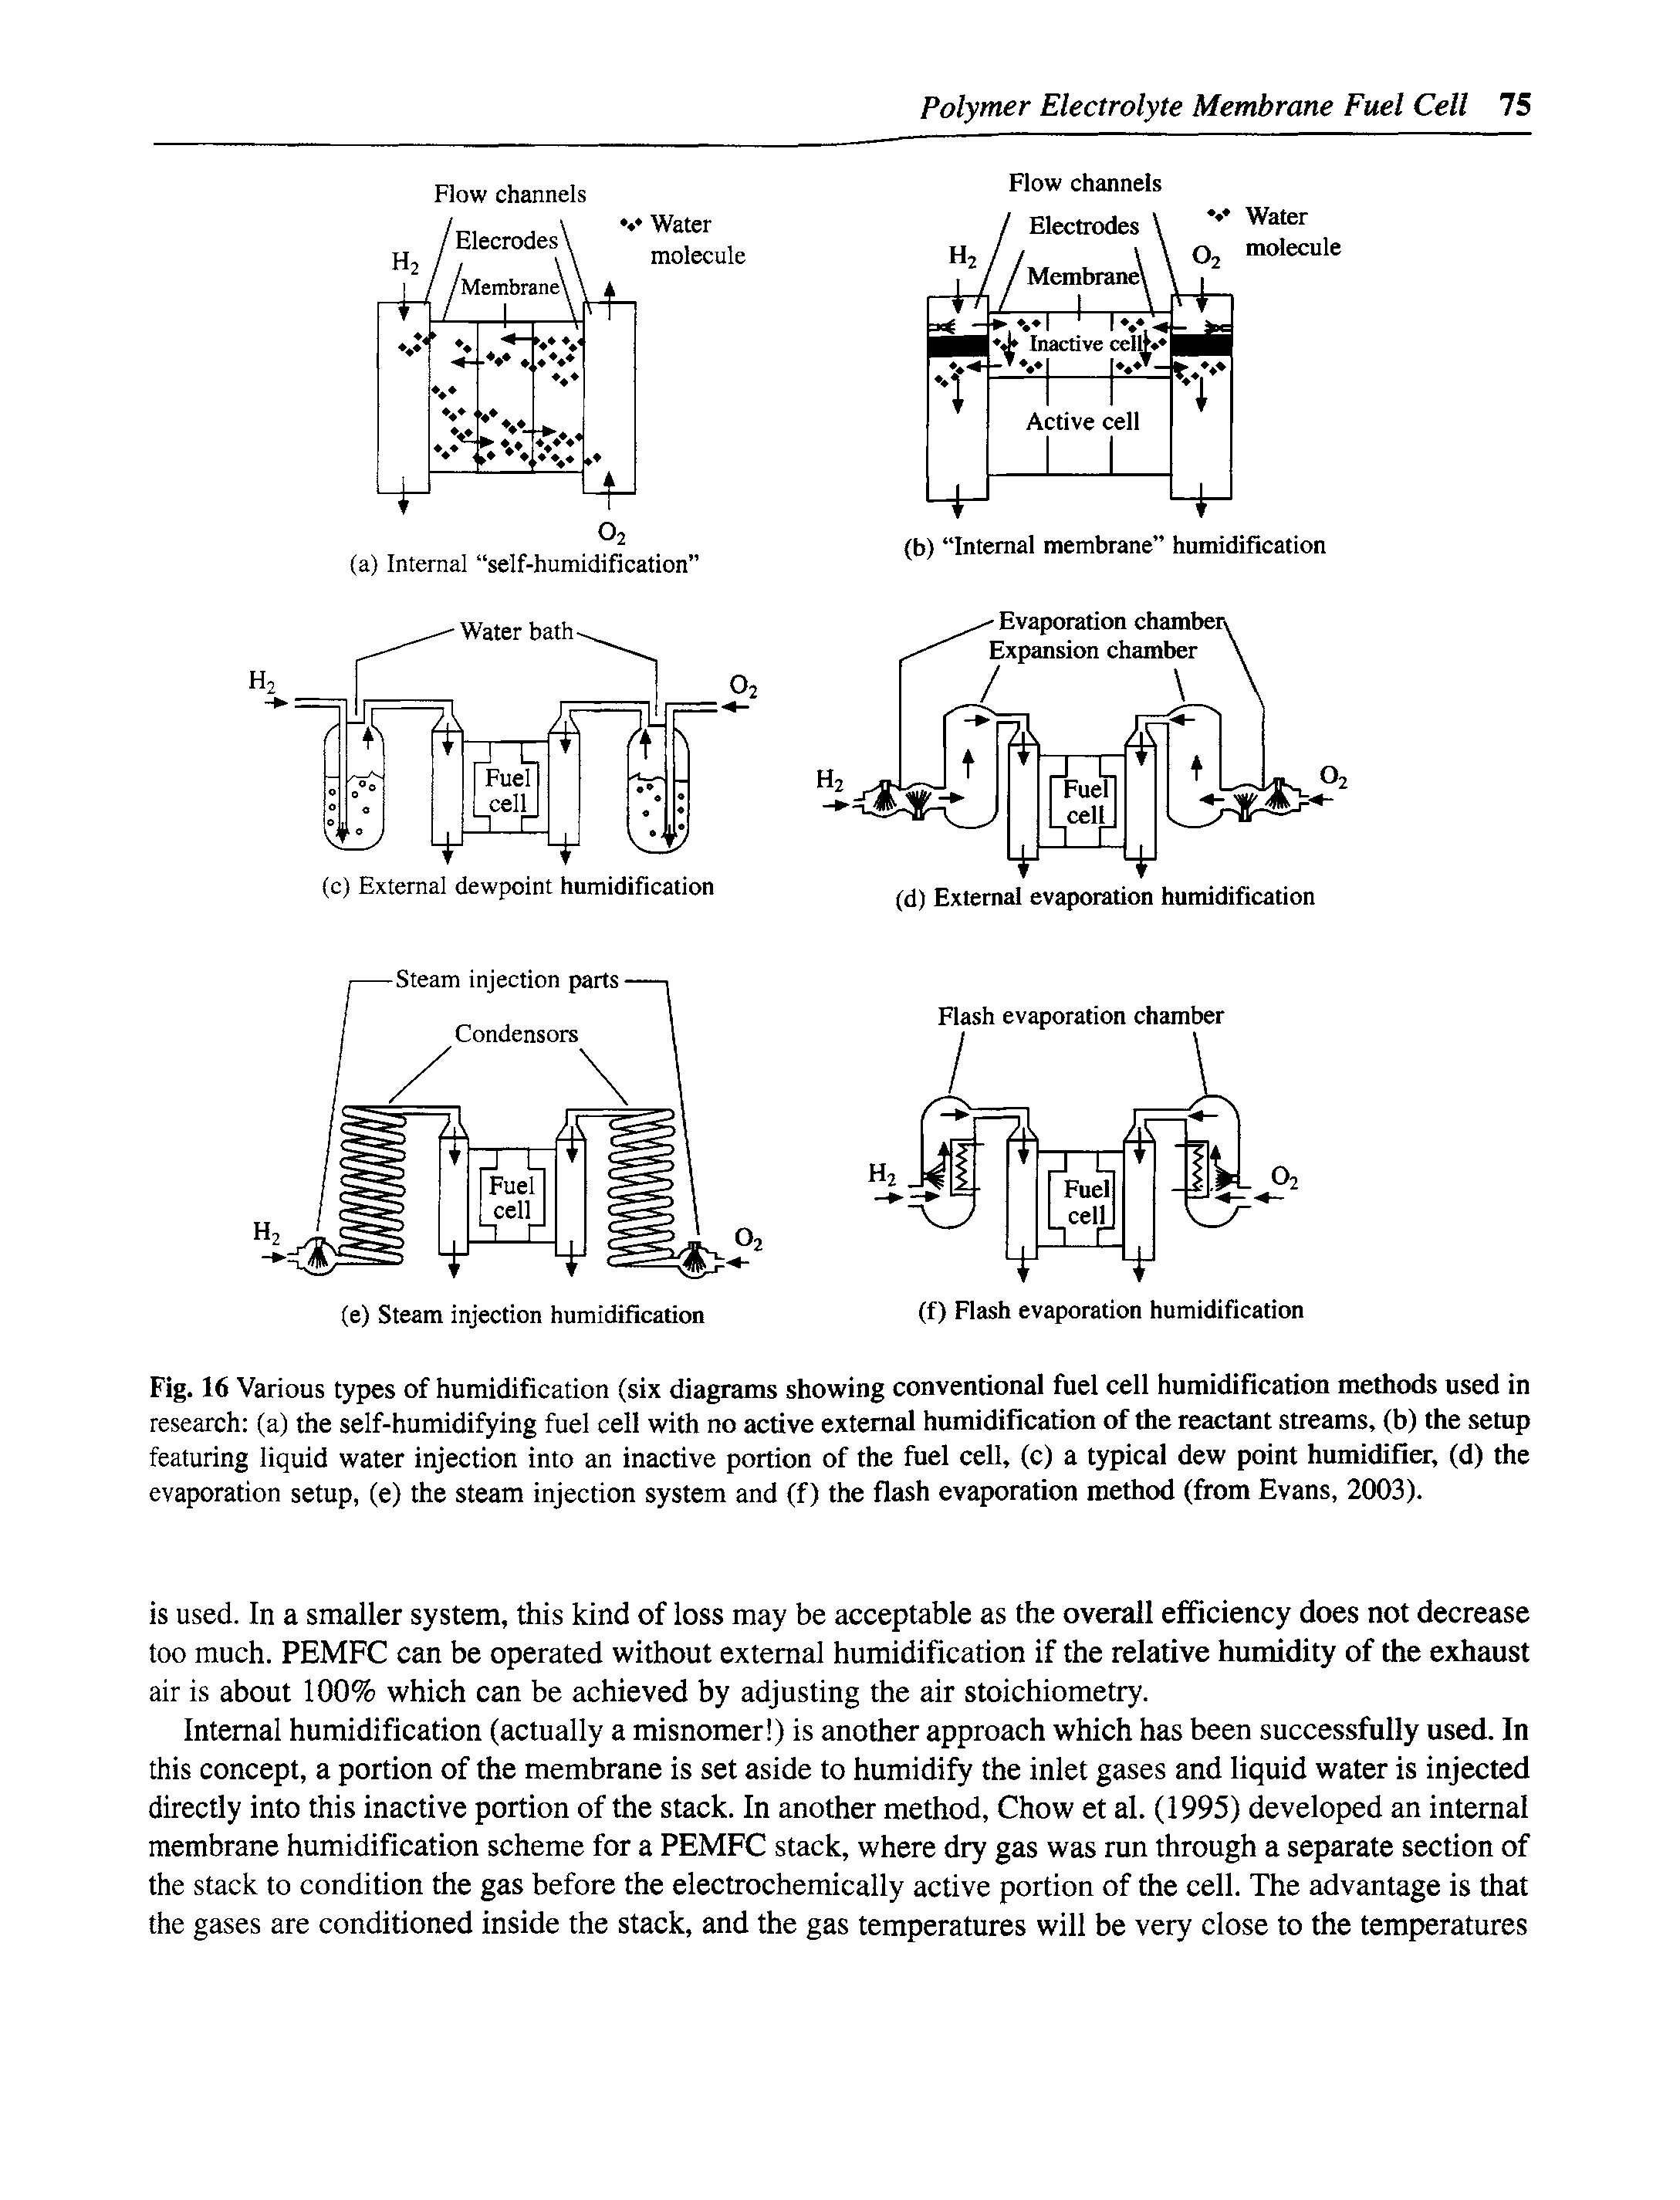 Fig. 16 Various types of humidification (six diagrams showing conventional fuel cell humidification methods used in research (a) the self-humidifying fuel cell with no active external humidification of the reactant streams, (b) the setup featuring liquid water injection into an inactive portion of the fuel cell, (c) a typical dew point humidifier, (d) the evaporation setup, (e) the steam injection system and (f) the flash evaporation method (from Evans, 2003).